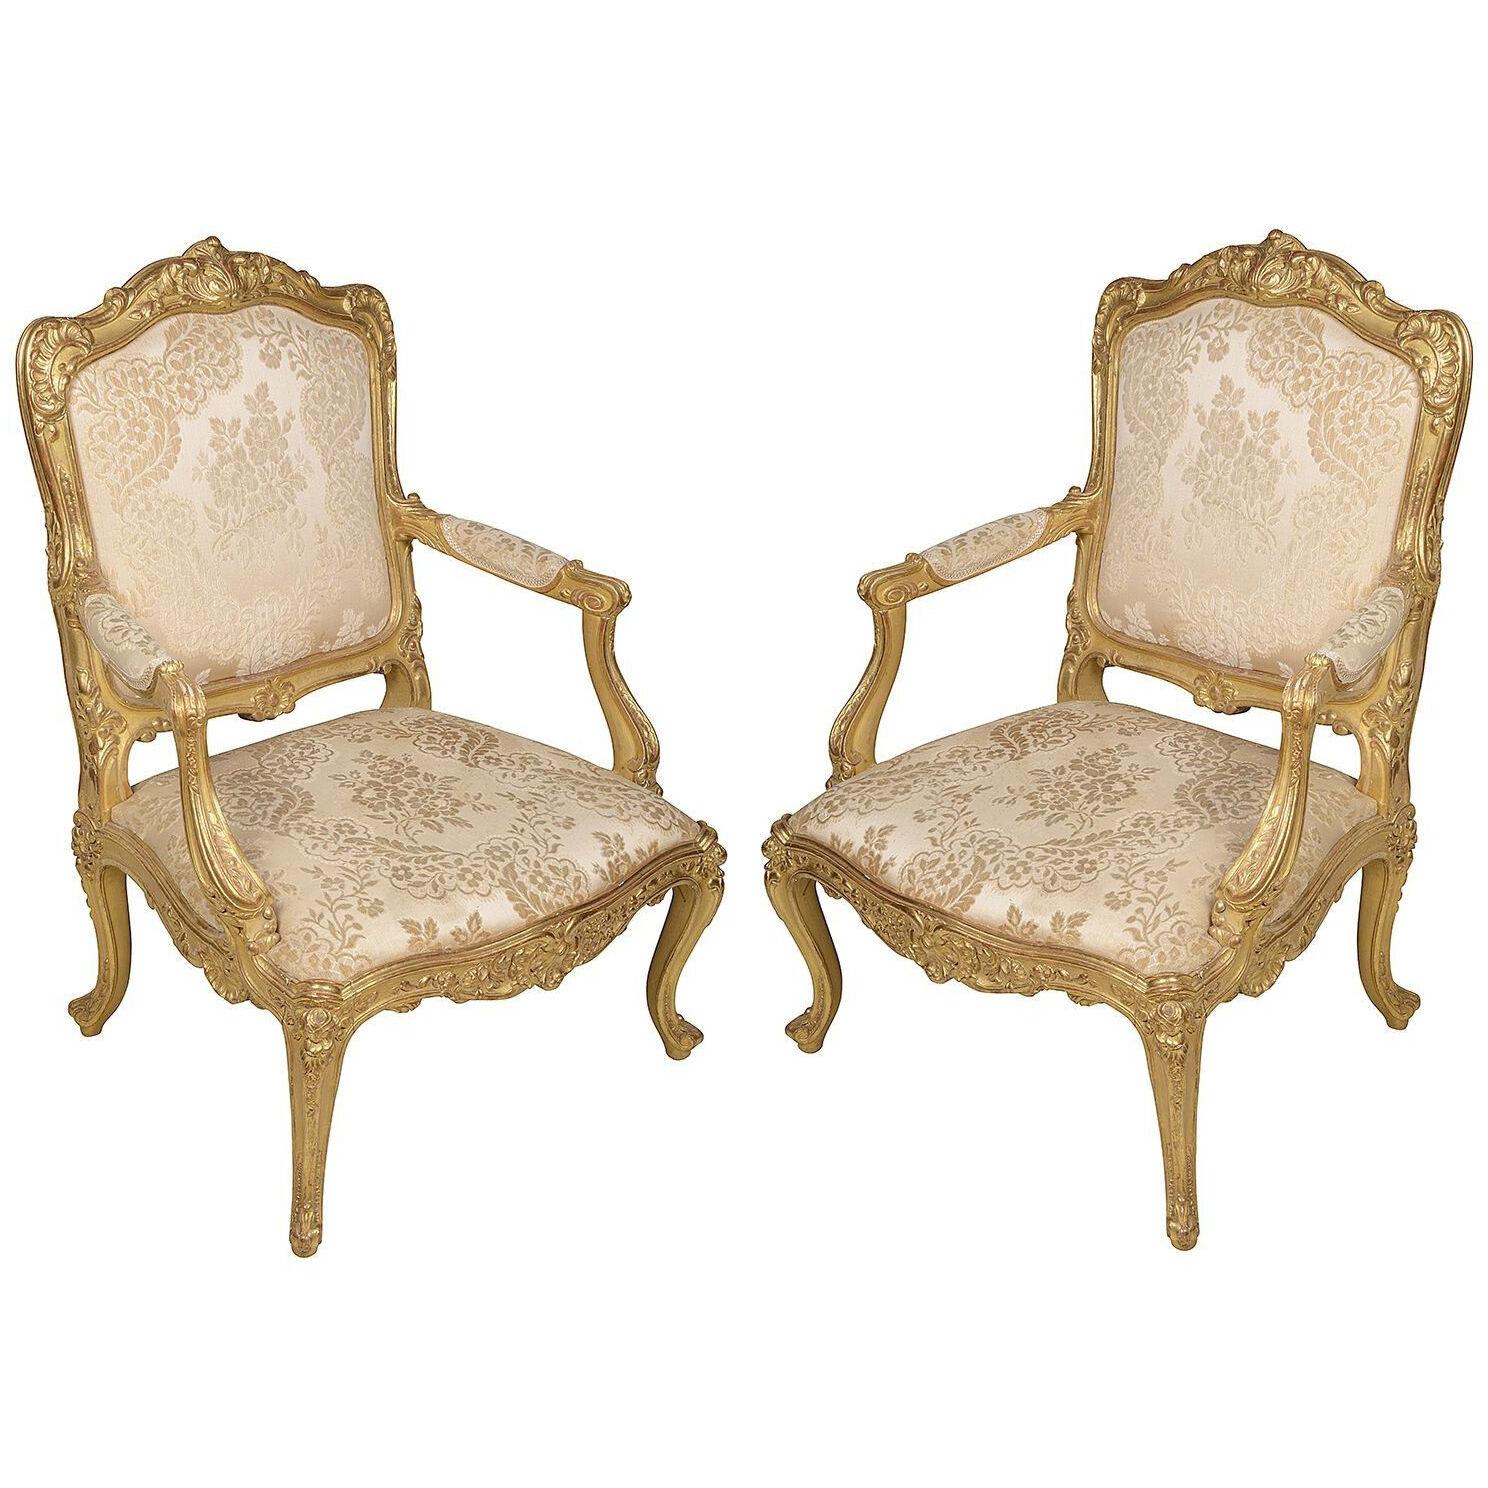 Pair 19th Century French carved giltwood Louis XVI style arm chairs.